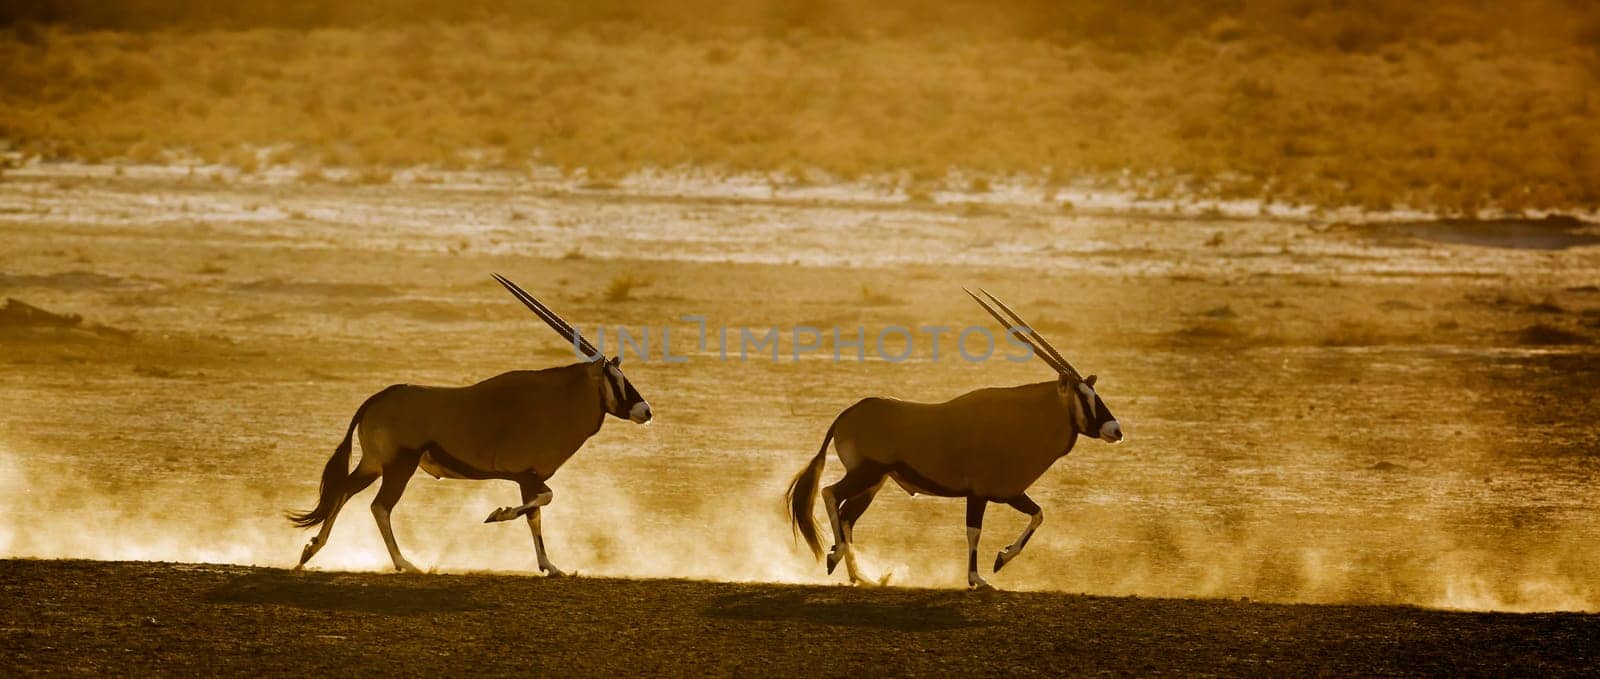 South african oryx  in Kgalagadi transfrontier park, South Africa by PACOCOMO